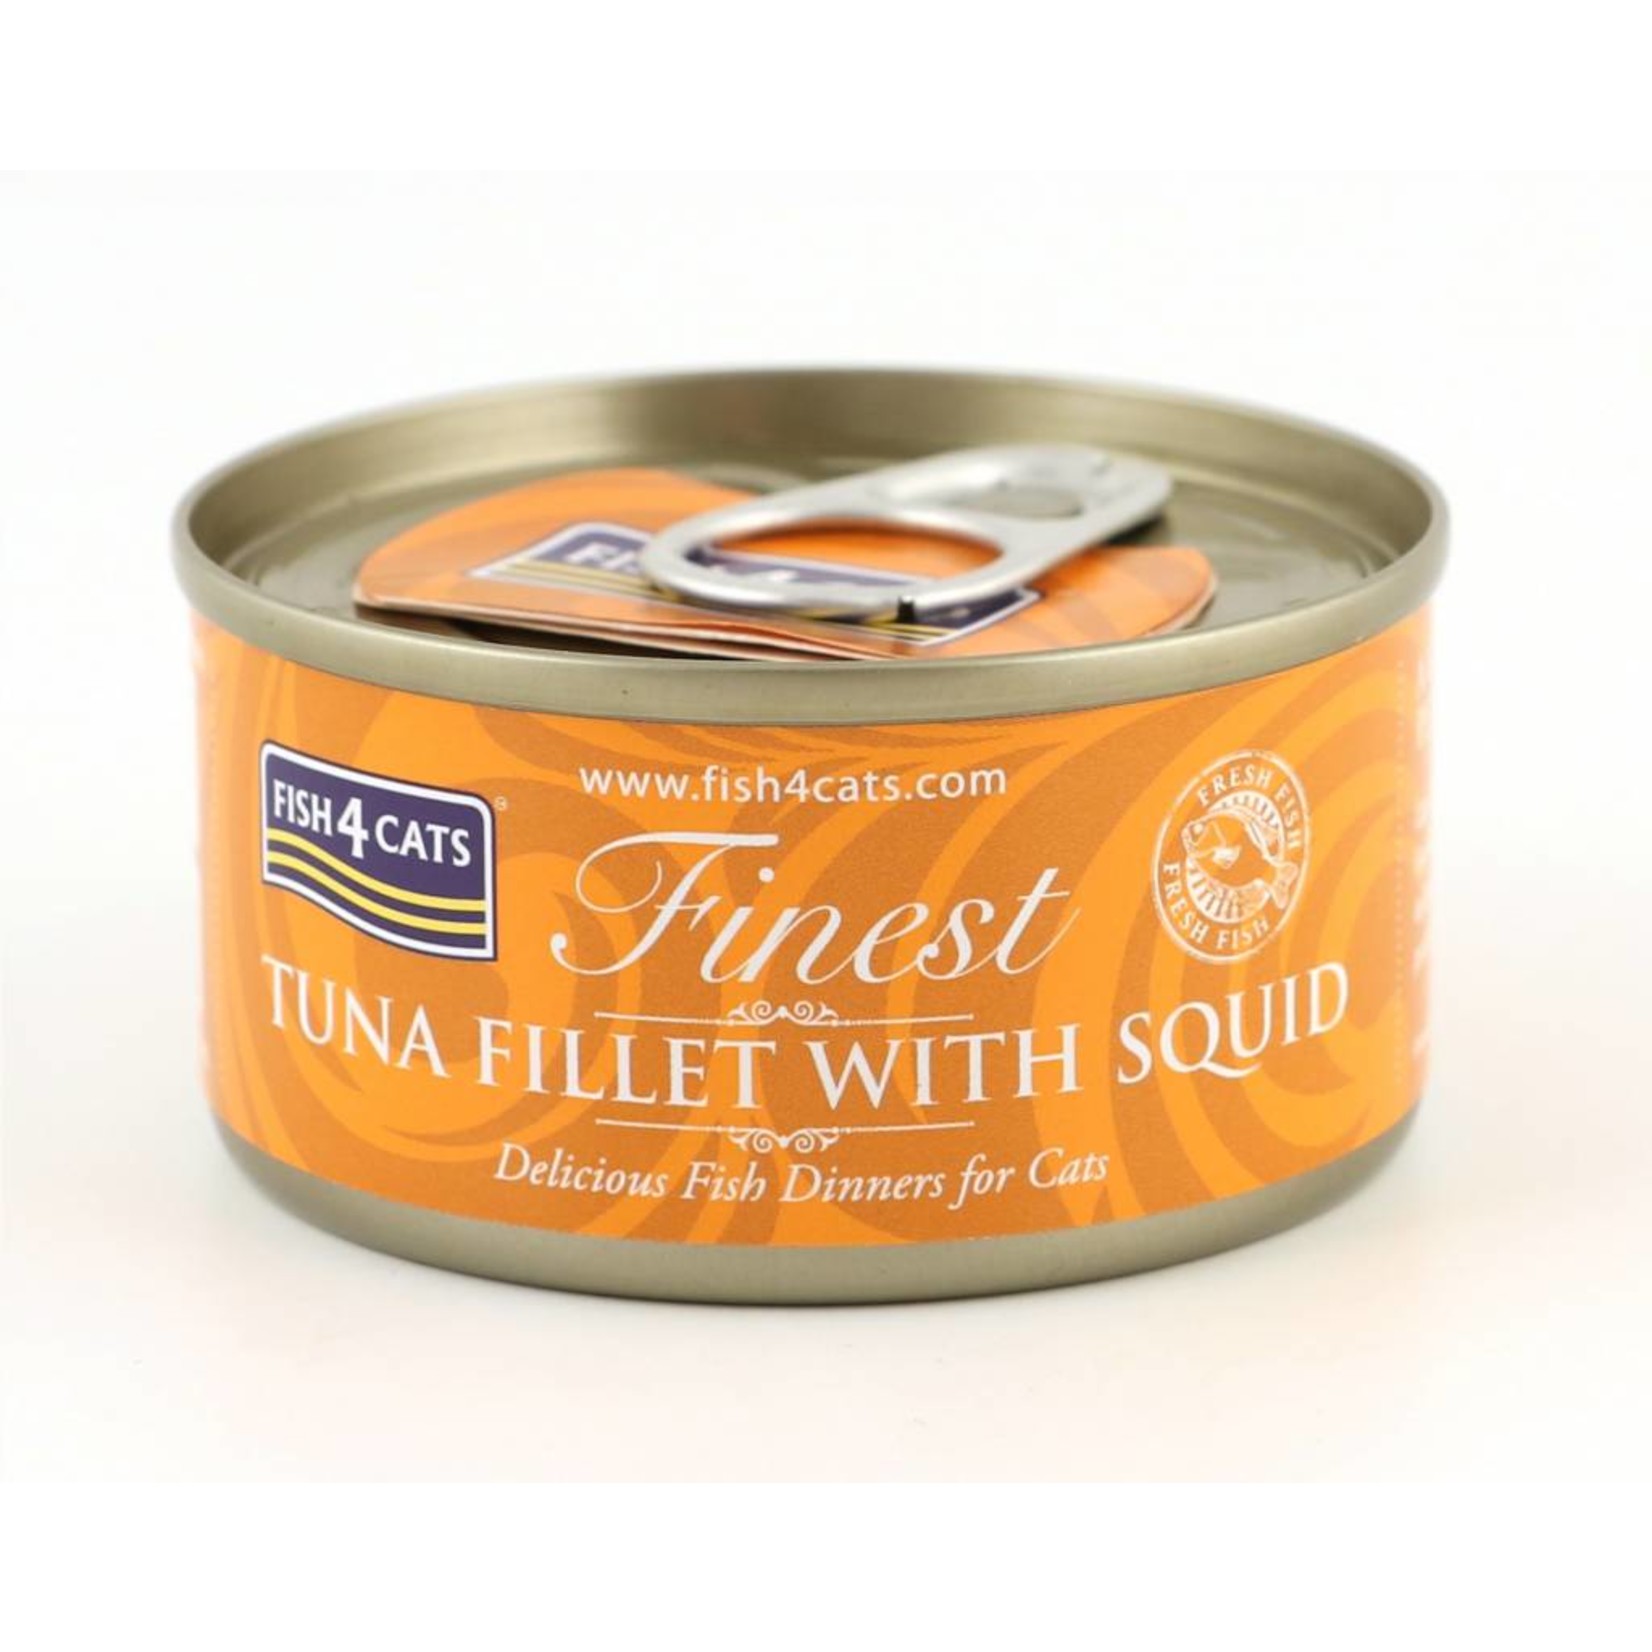 Fish4Cats Finest Tuna Fillet with Squid Wet Cat Food, 70g can